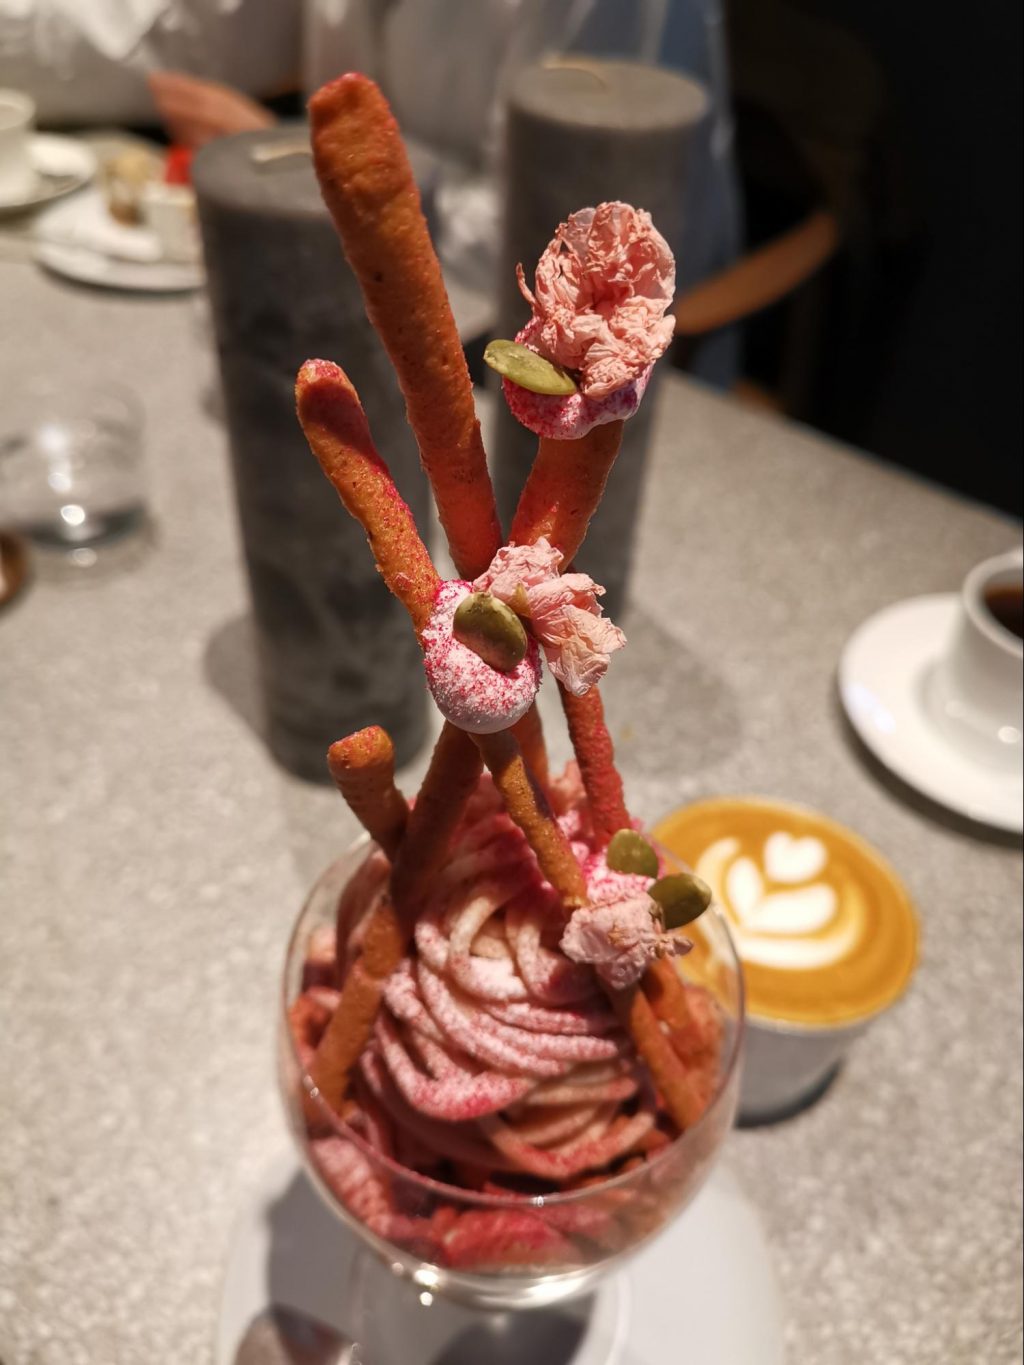 sakura and strawberry parfait - The salty sakura gelato is incredible, although the strawberries themselves are a little underwhelming